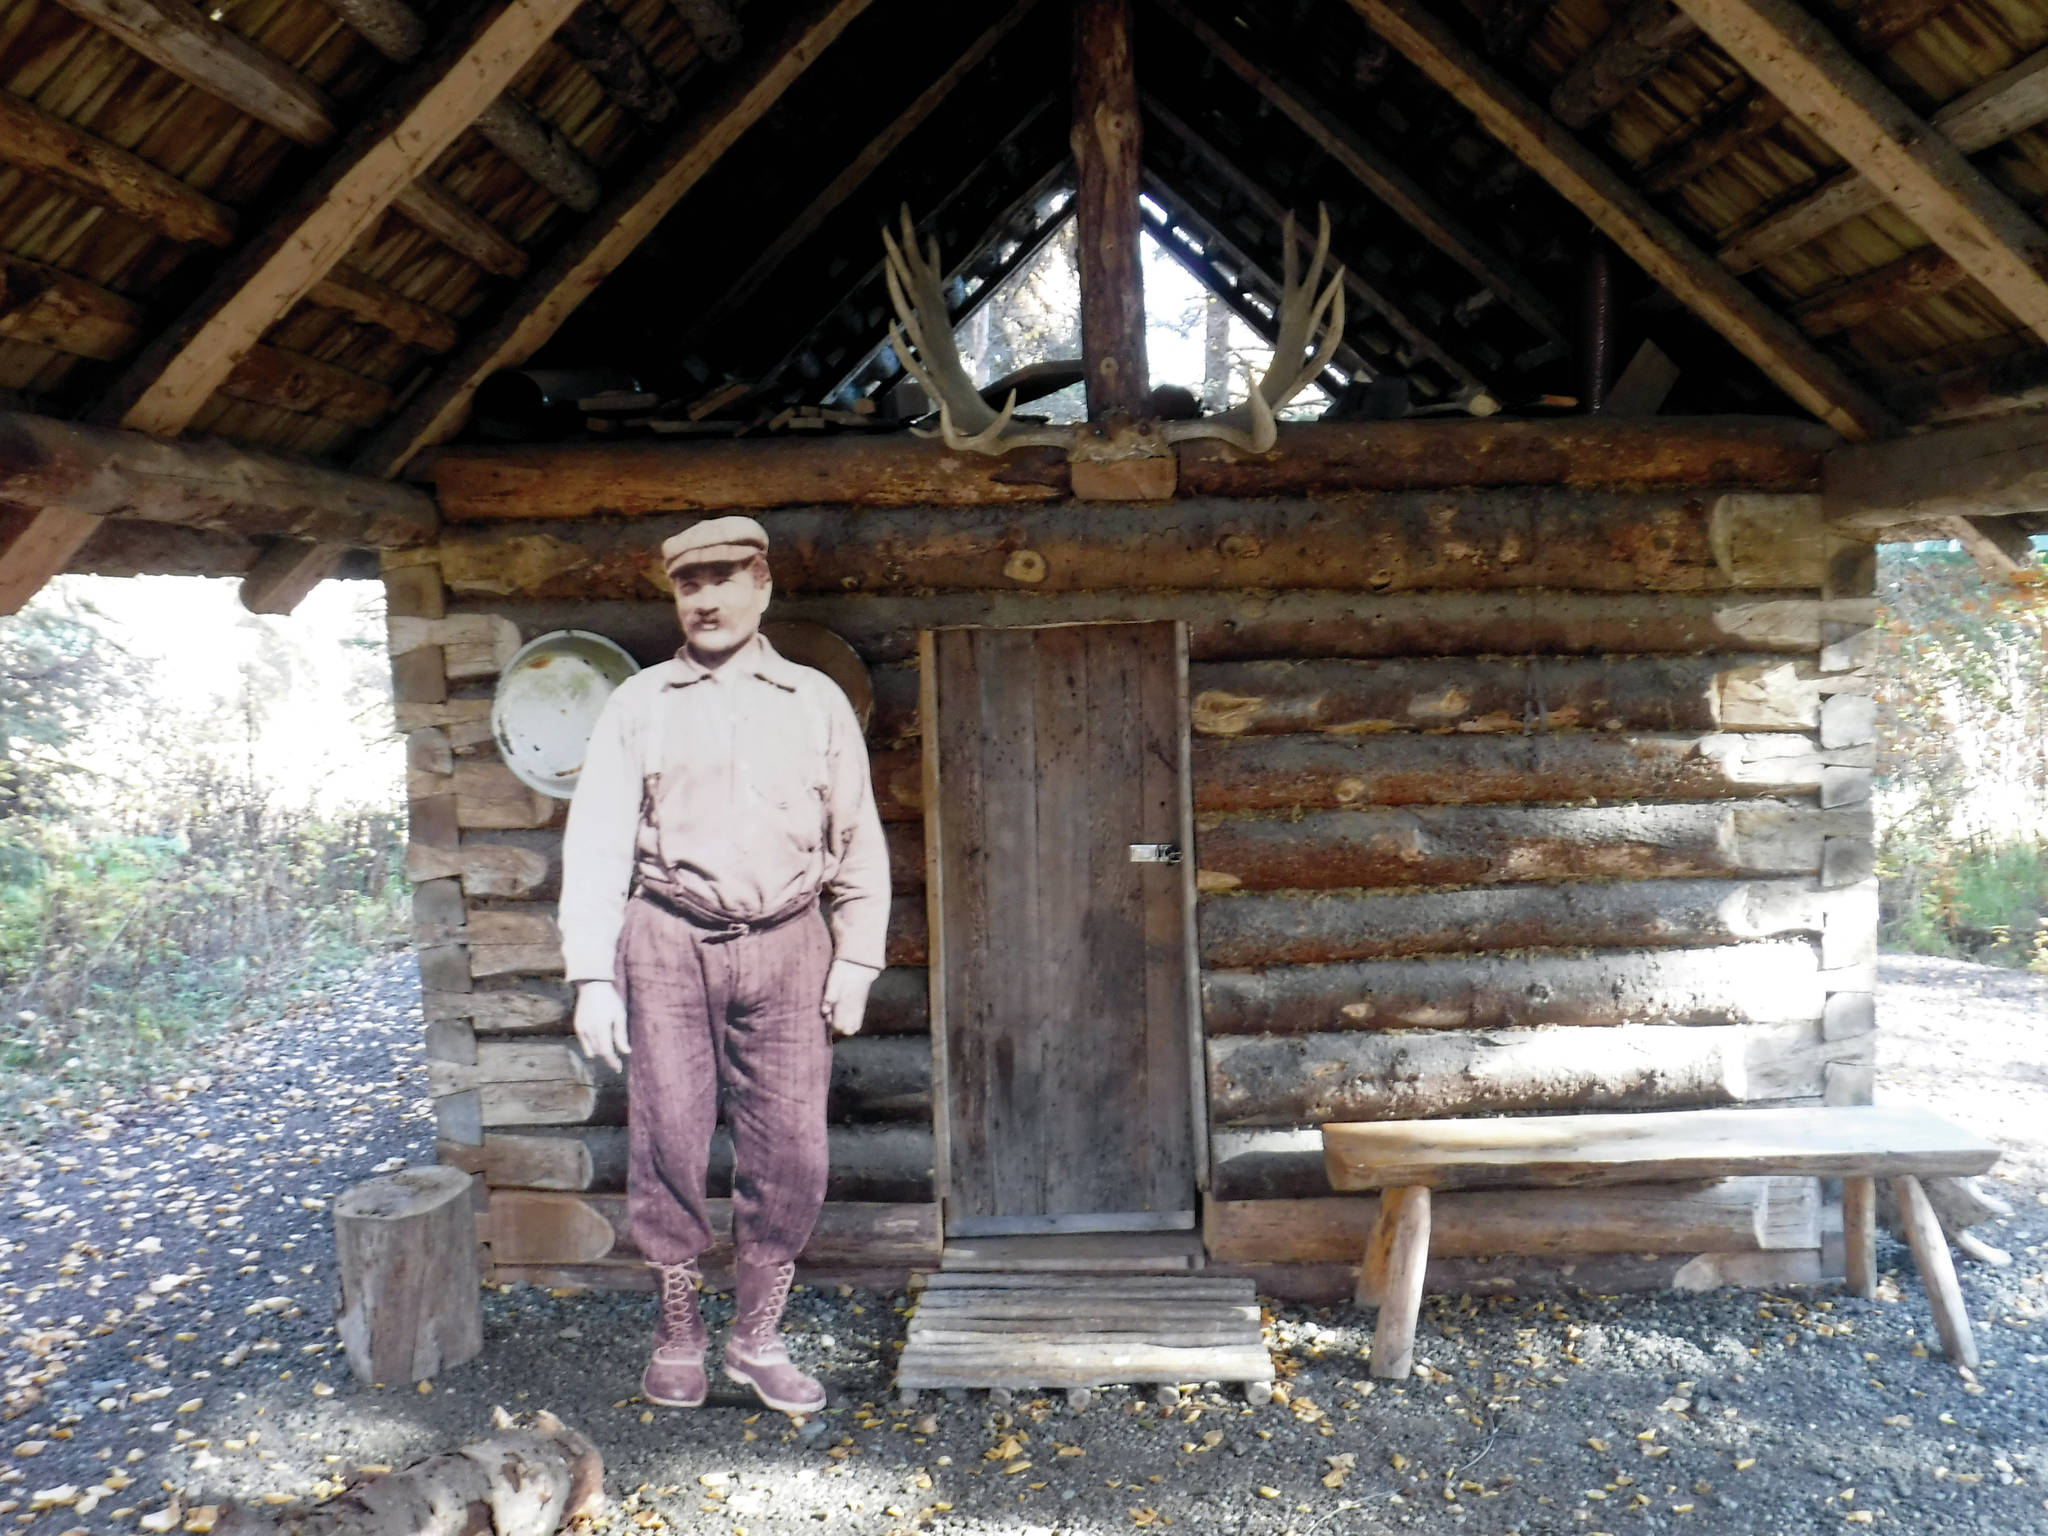 Photo provided by Kenai National Wildlife RefugeAndrew Berg outside his ҈omesteadӠcabin, which stood originally on Tustumena Lake and now stands at the headquarters of Kenai National Wildlife Refuge.